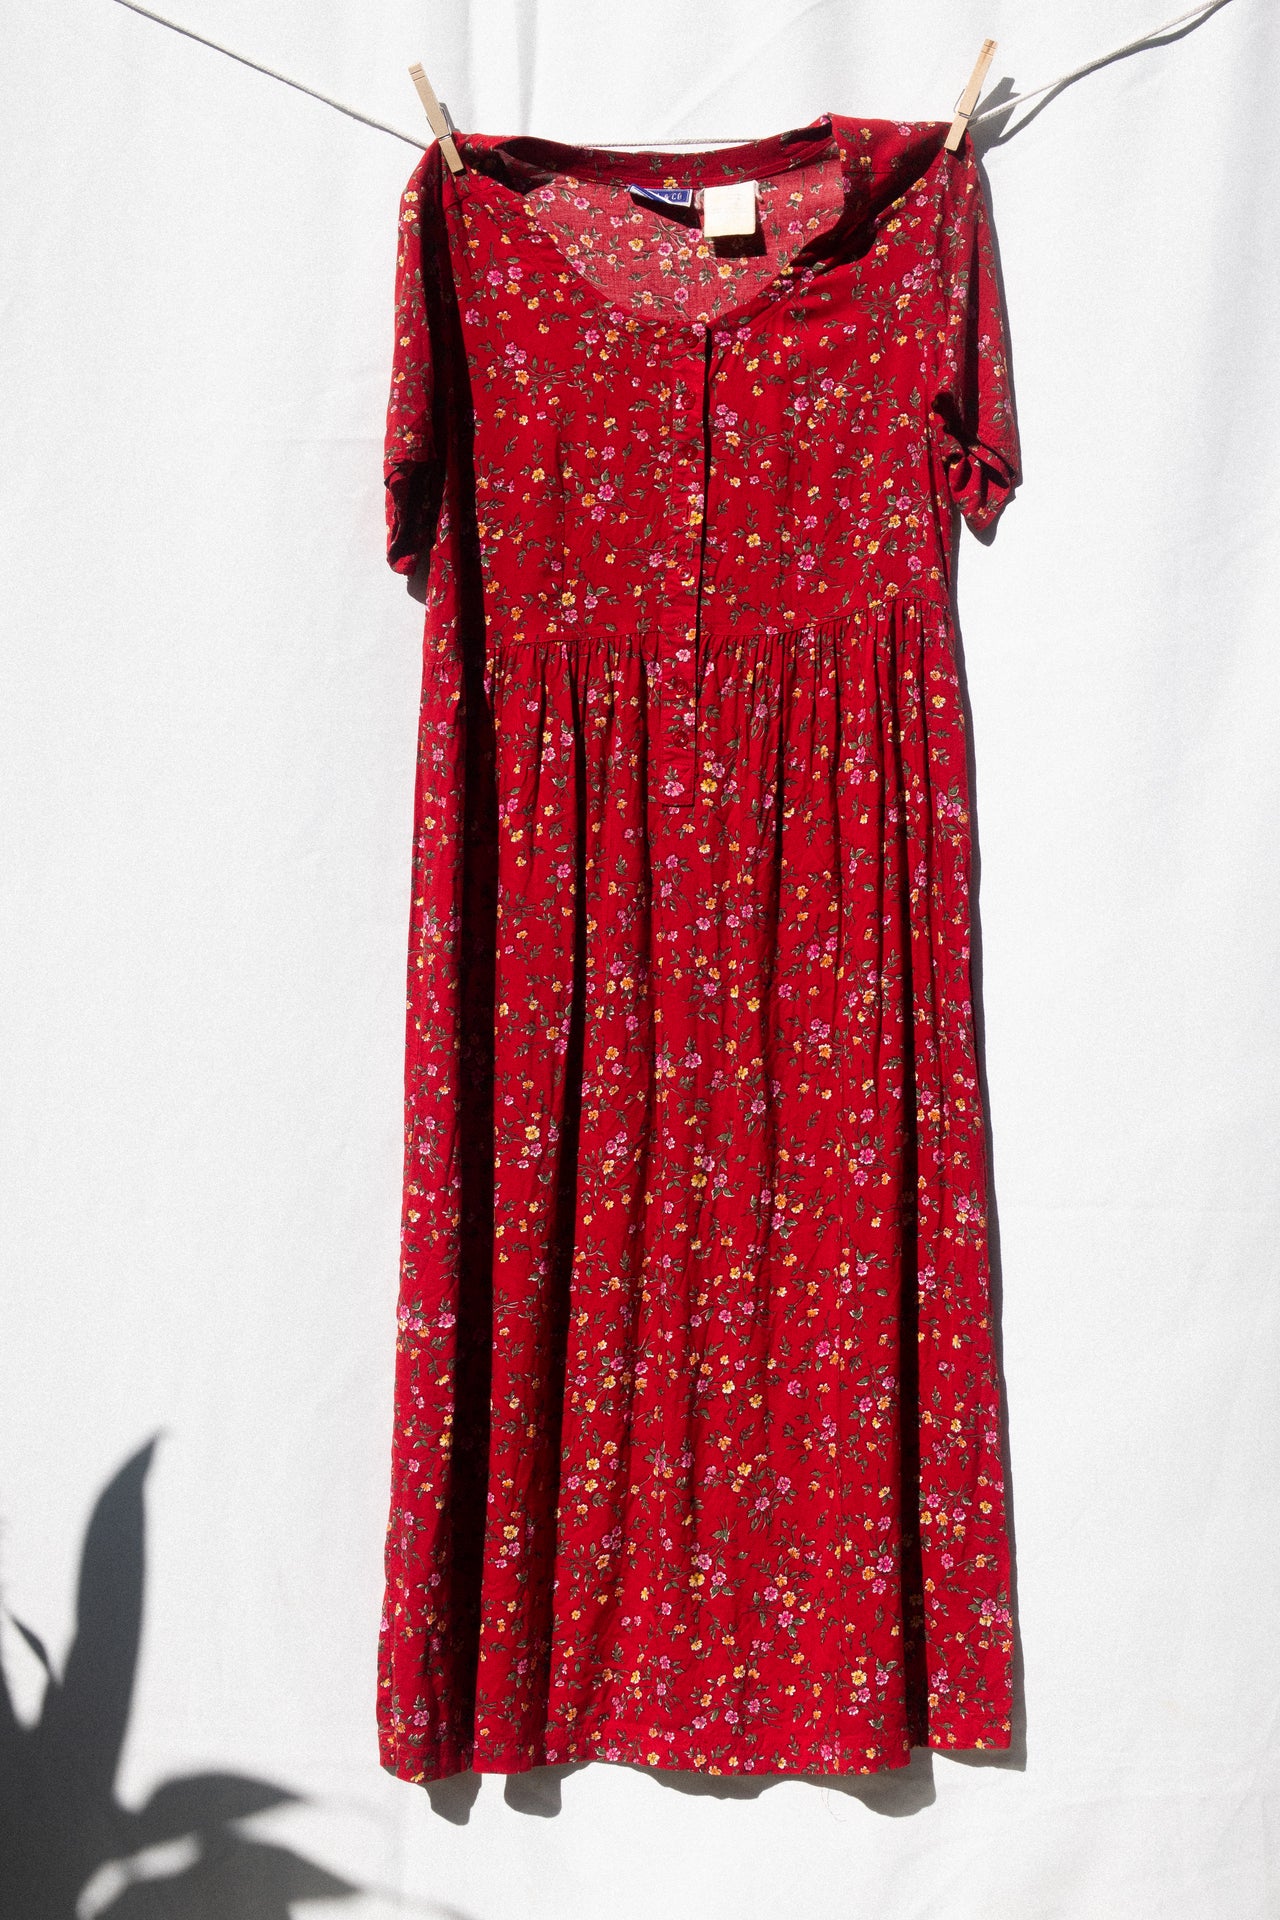 Red Floral Dress with Buttons